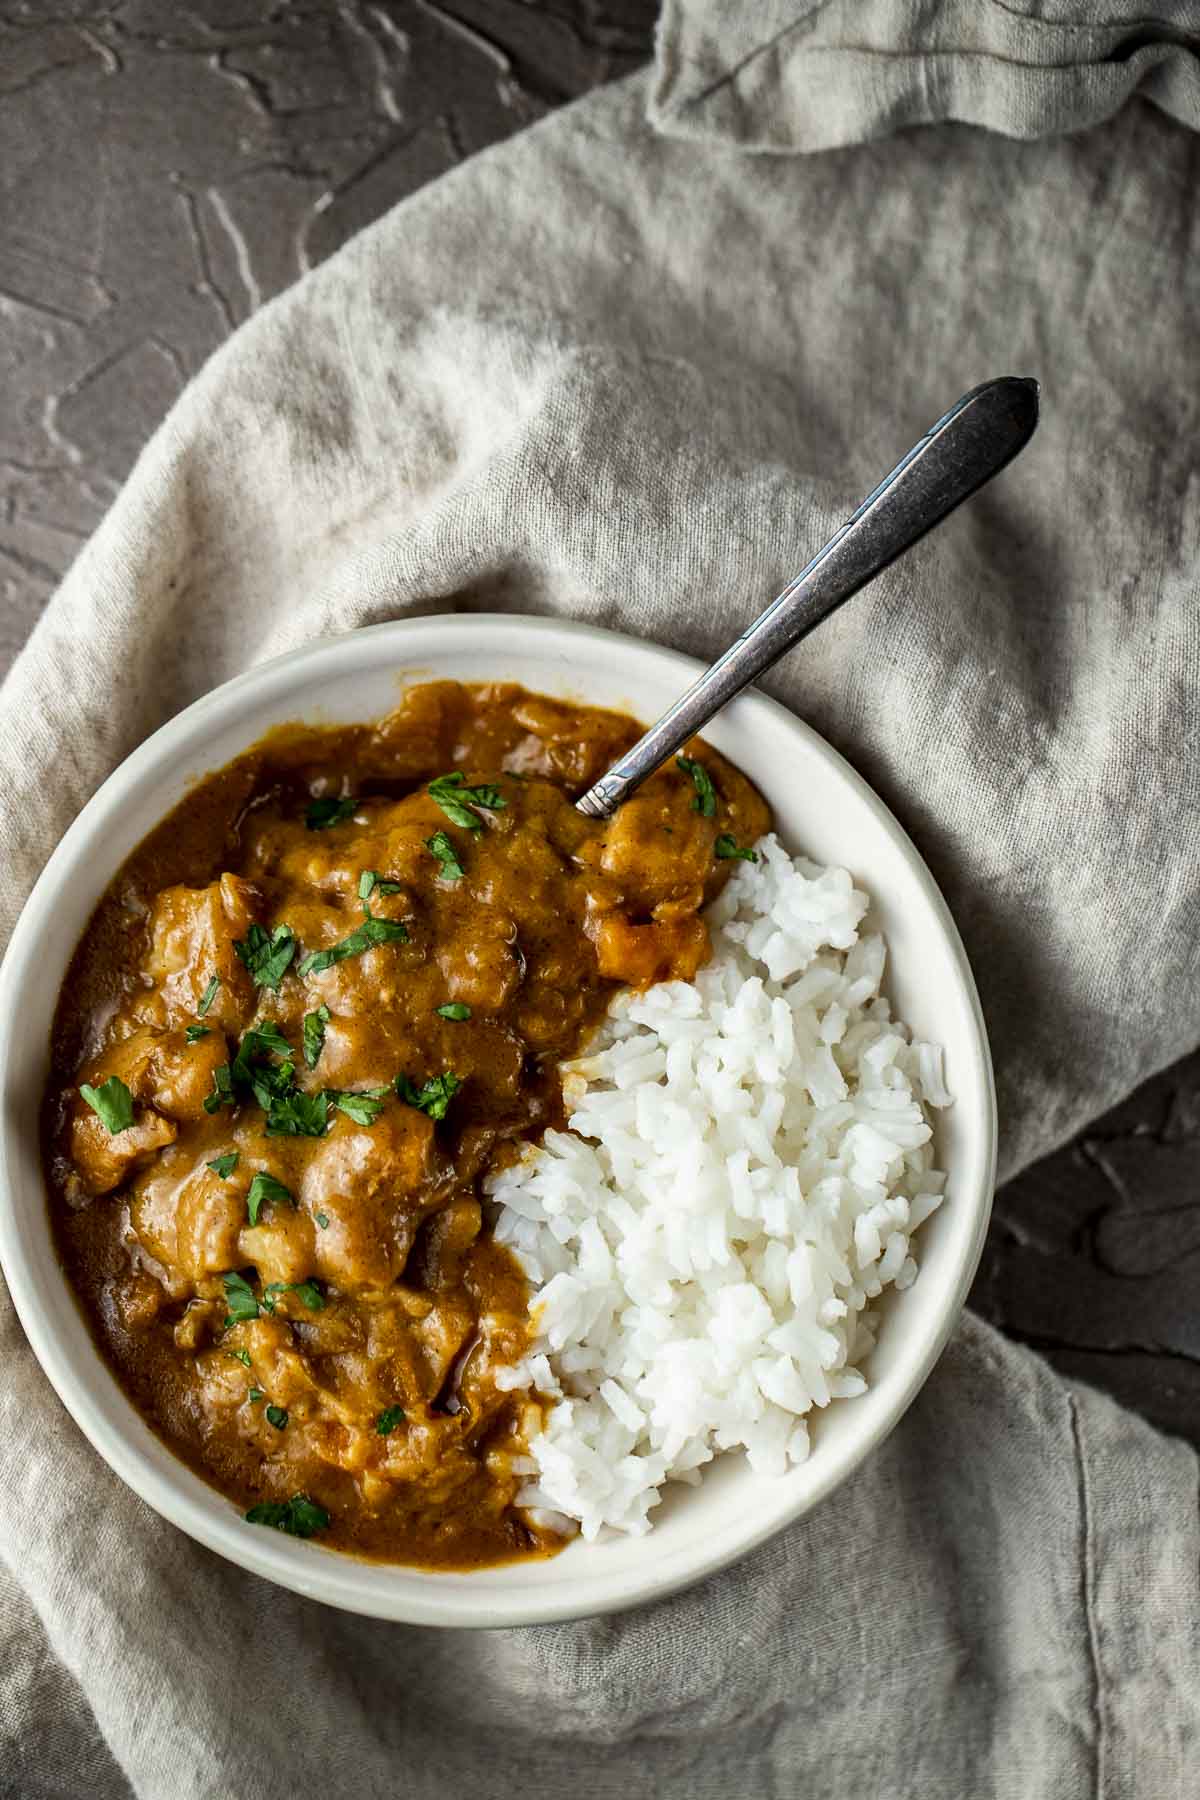 chicken and vegetables in orange curry sauce with rice in a bowl